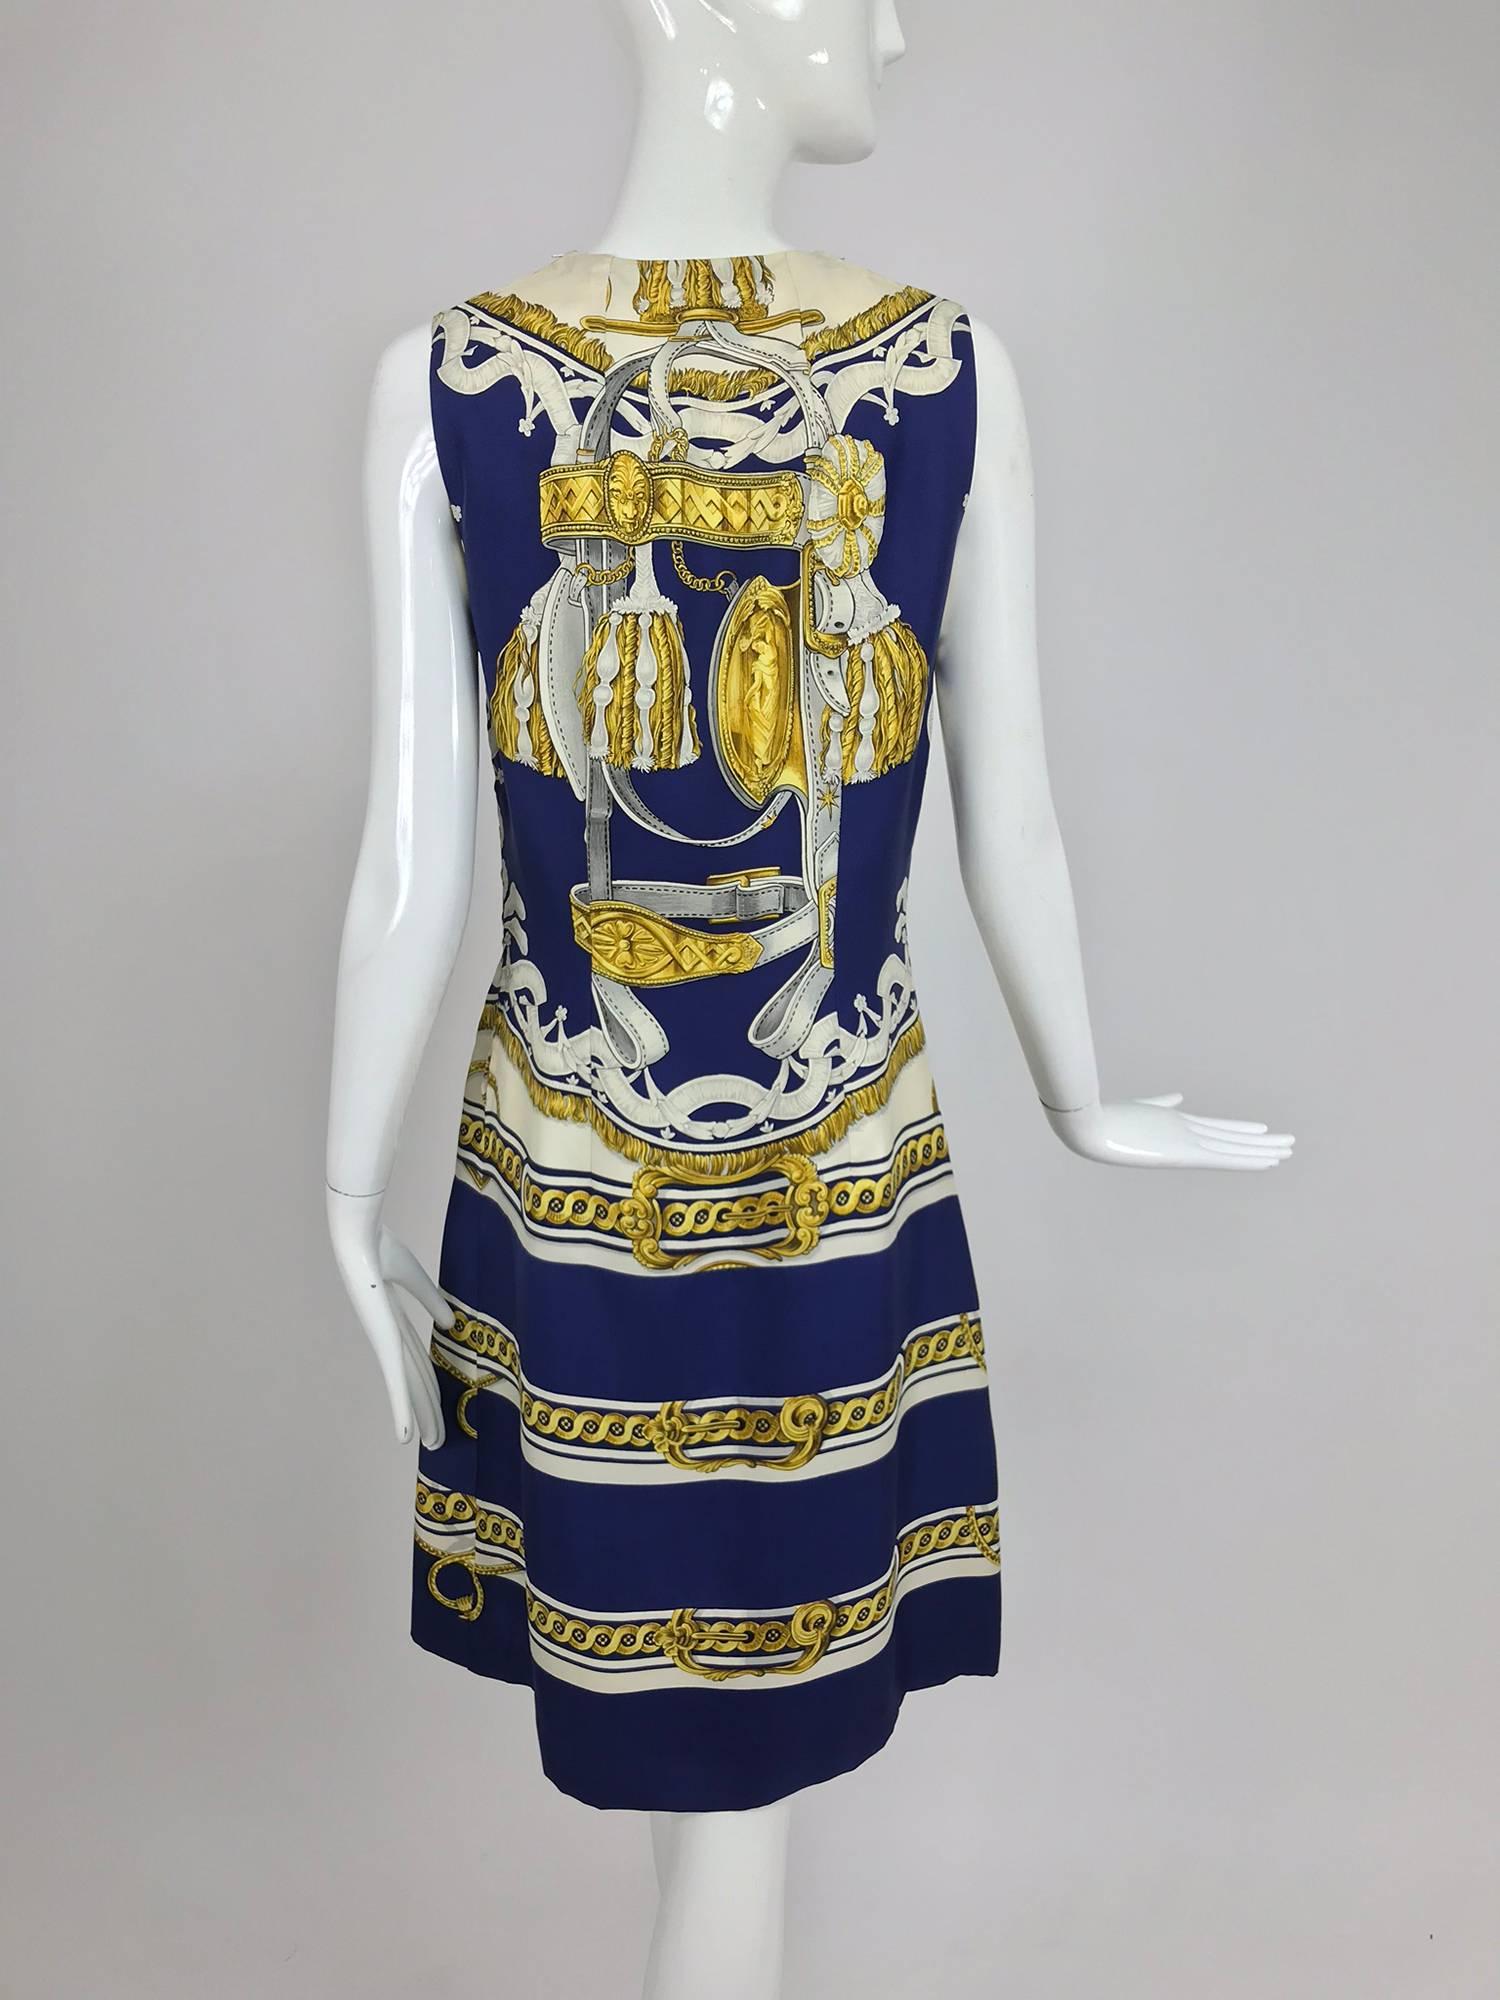 Hermes printed silk twill sheath dress 1970s 42 In Excellent Condition For Sale In West Palm Beach, FL